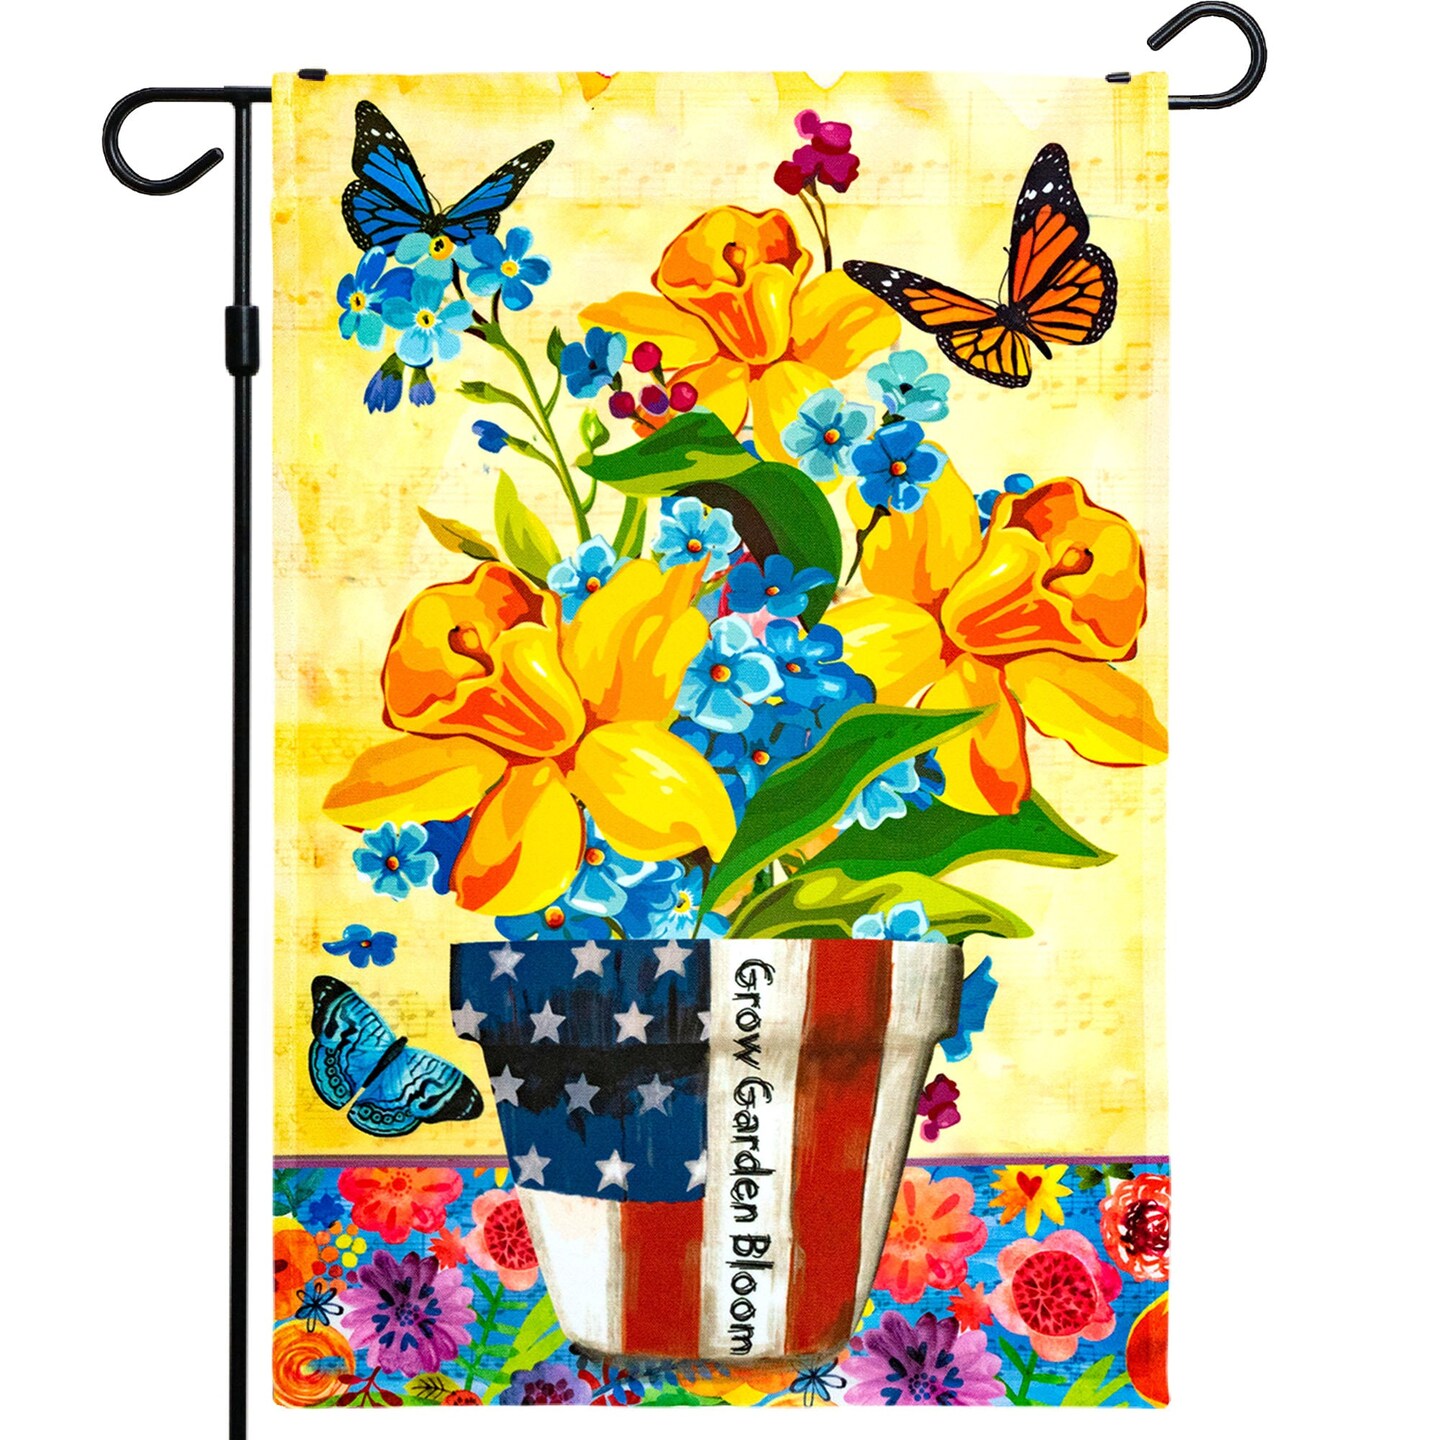 G128 - Grow Garden Spring Bloom USA Patriotic Flower Pot with Butterflies Garden Flag | 12x18 Inch | Printed 150D Polyester - Rustic Holiday Seasonal Outdoor Flag